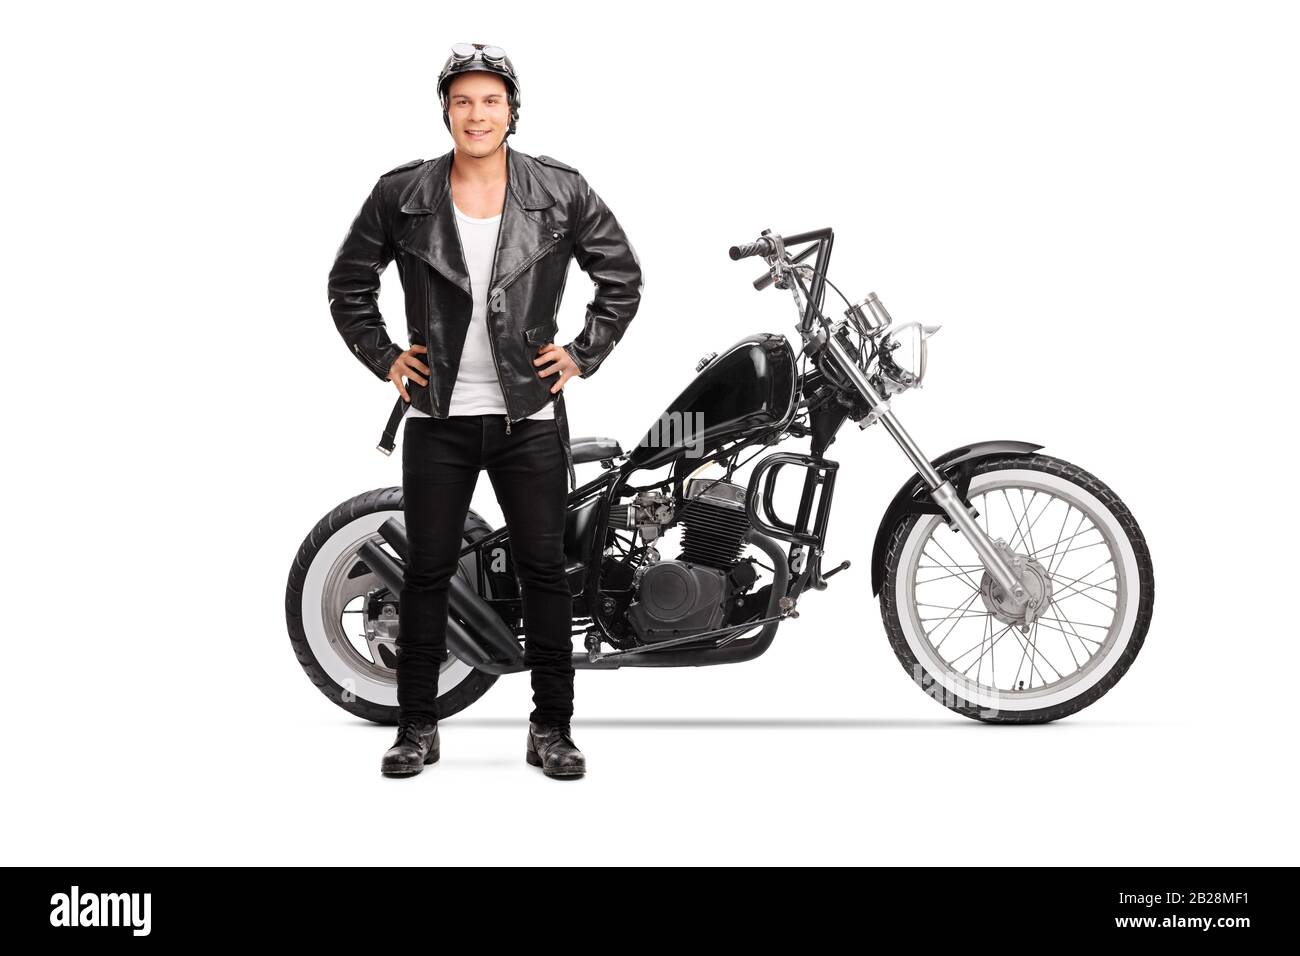 Full length portrait of a biker posing next to a customized chopper motorbike isolated on white background Stock Photo